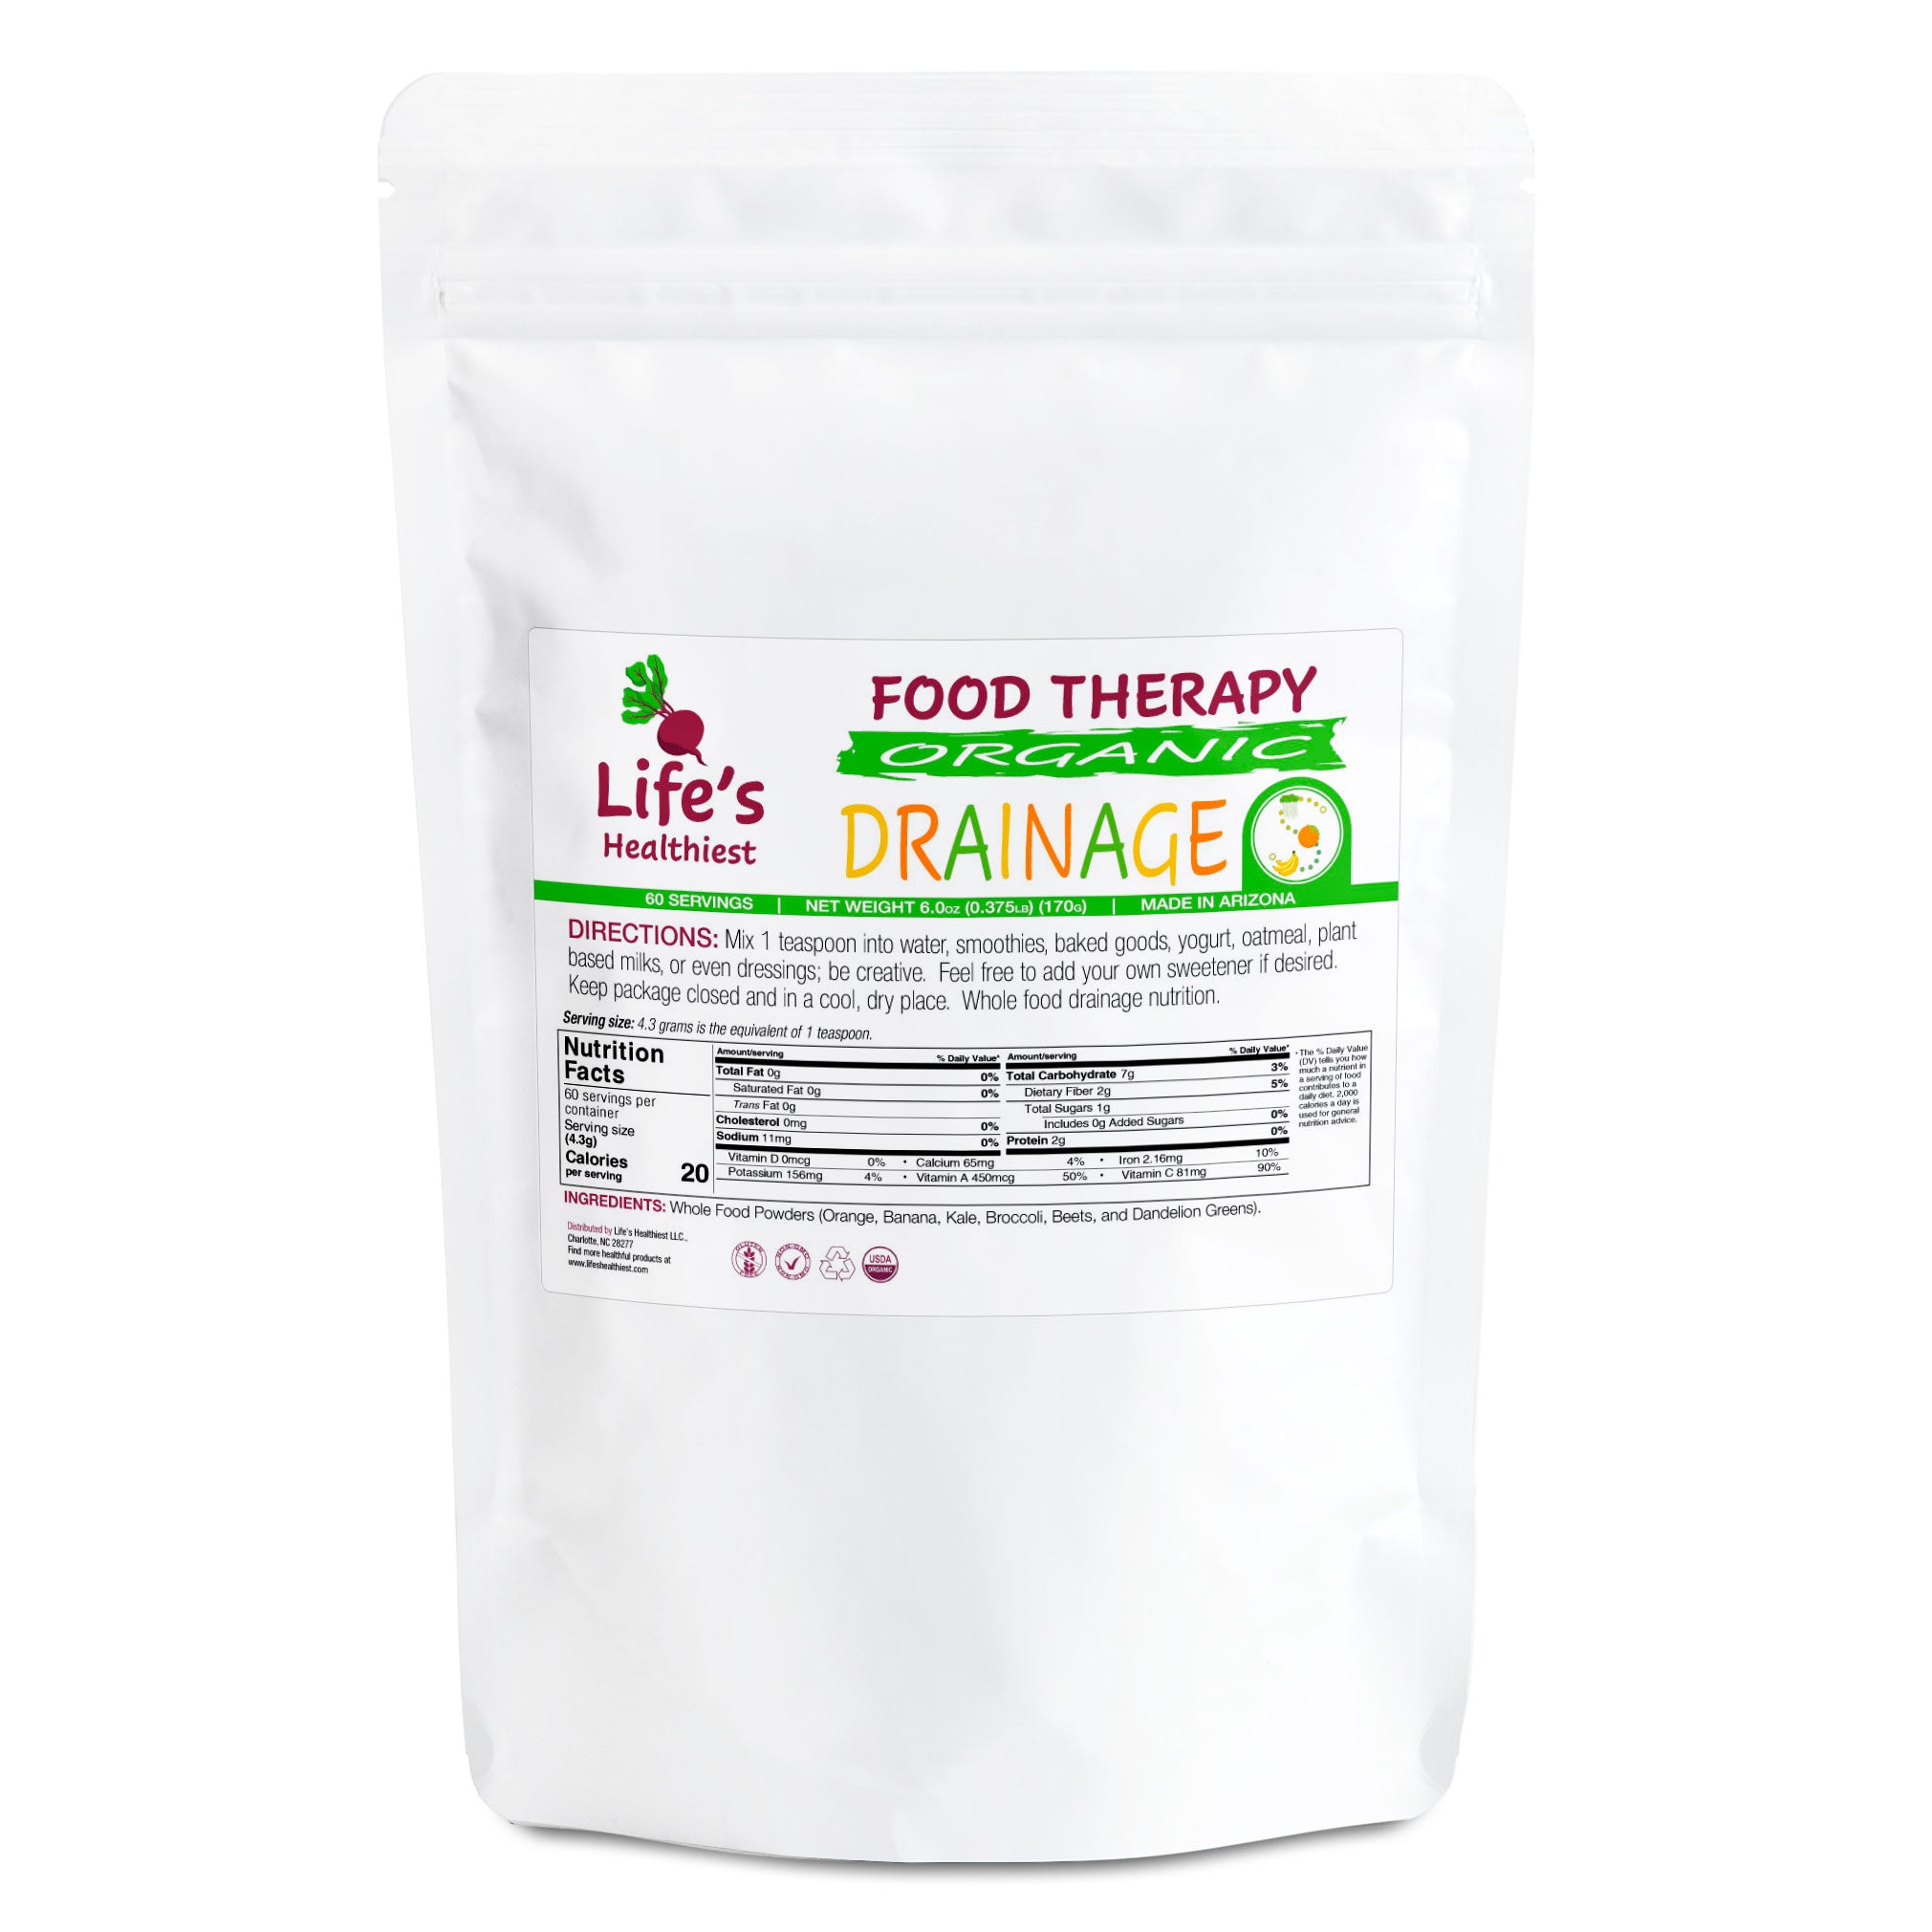 Life's Healthiest DRAINAGE Whole Food Therapy....Food Based Drainage 6.0 oz